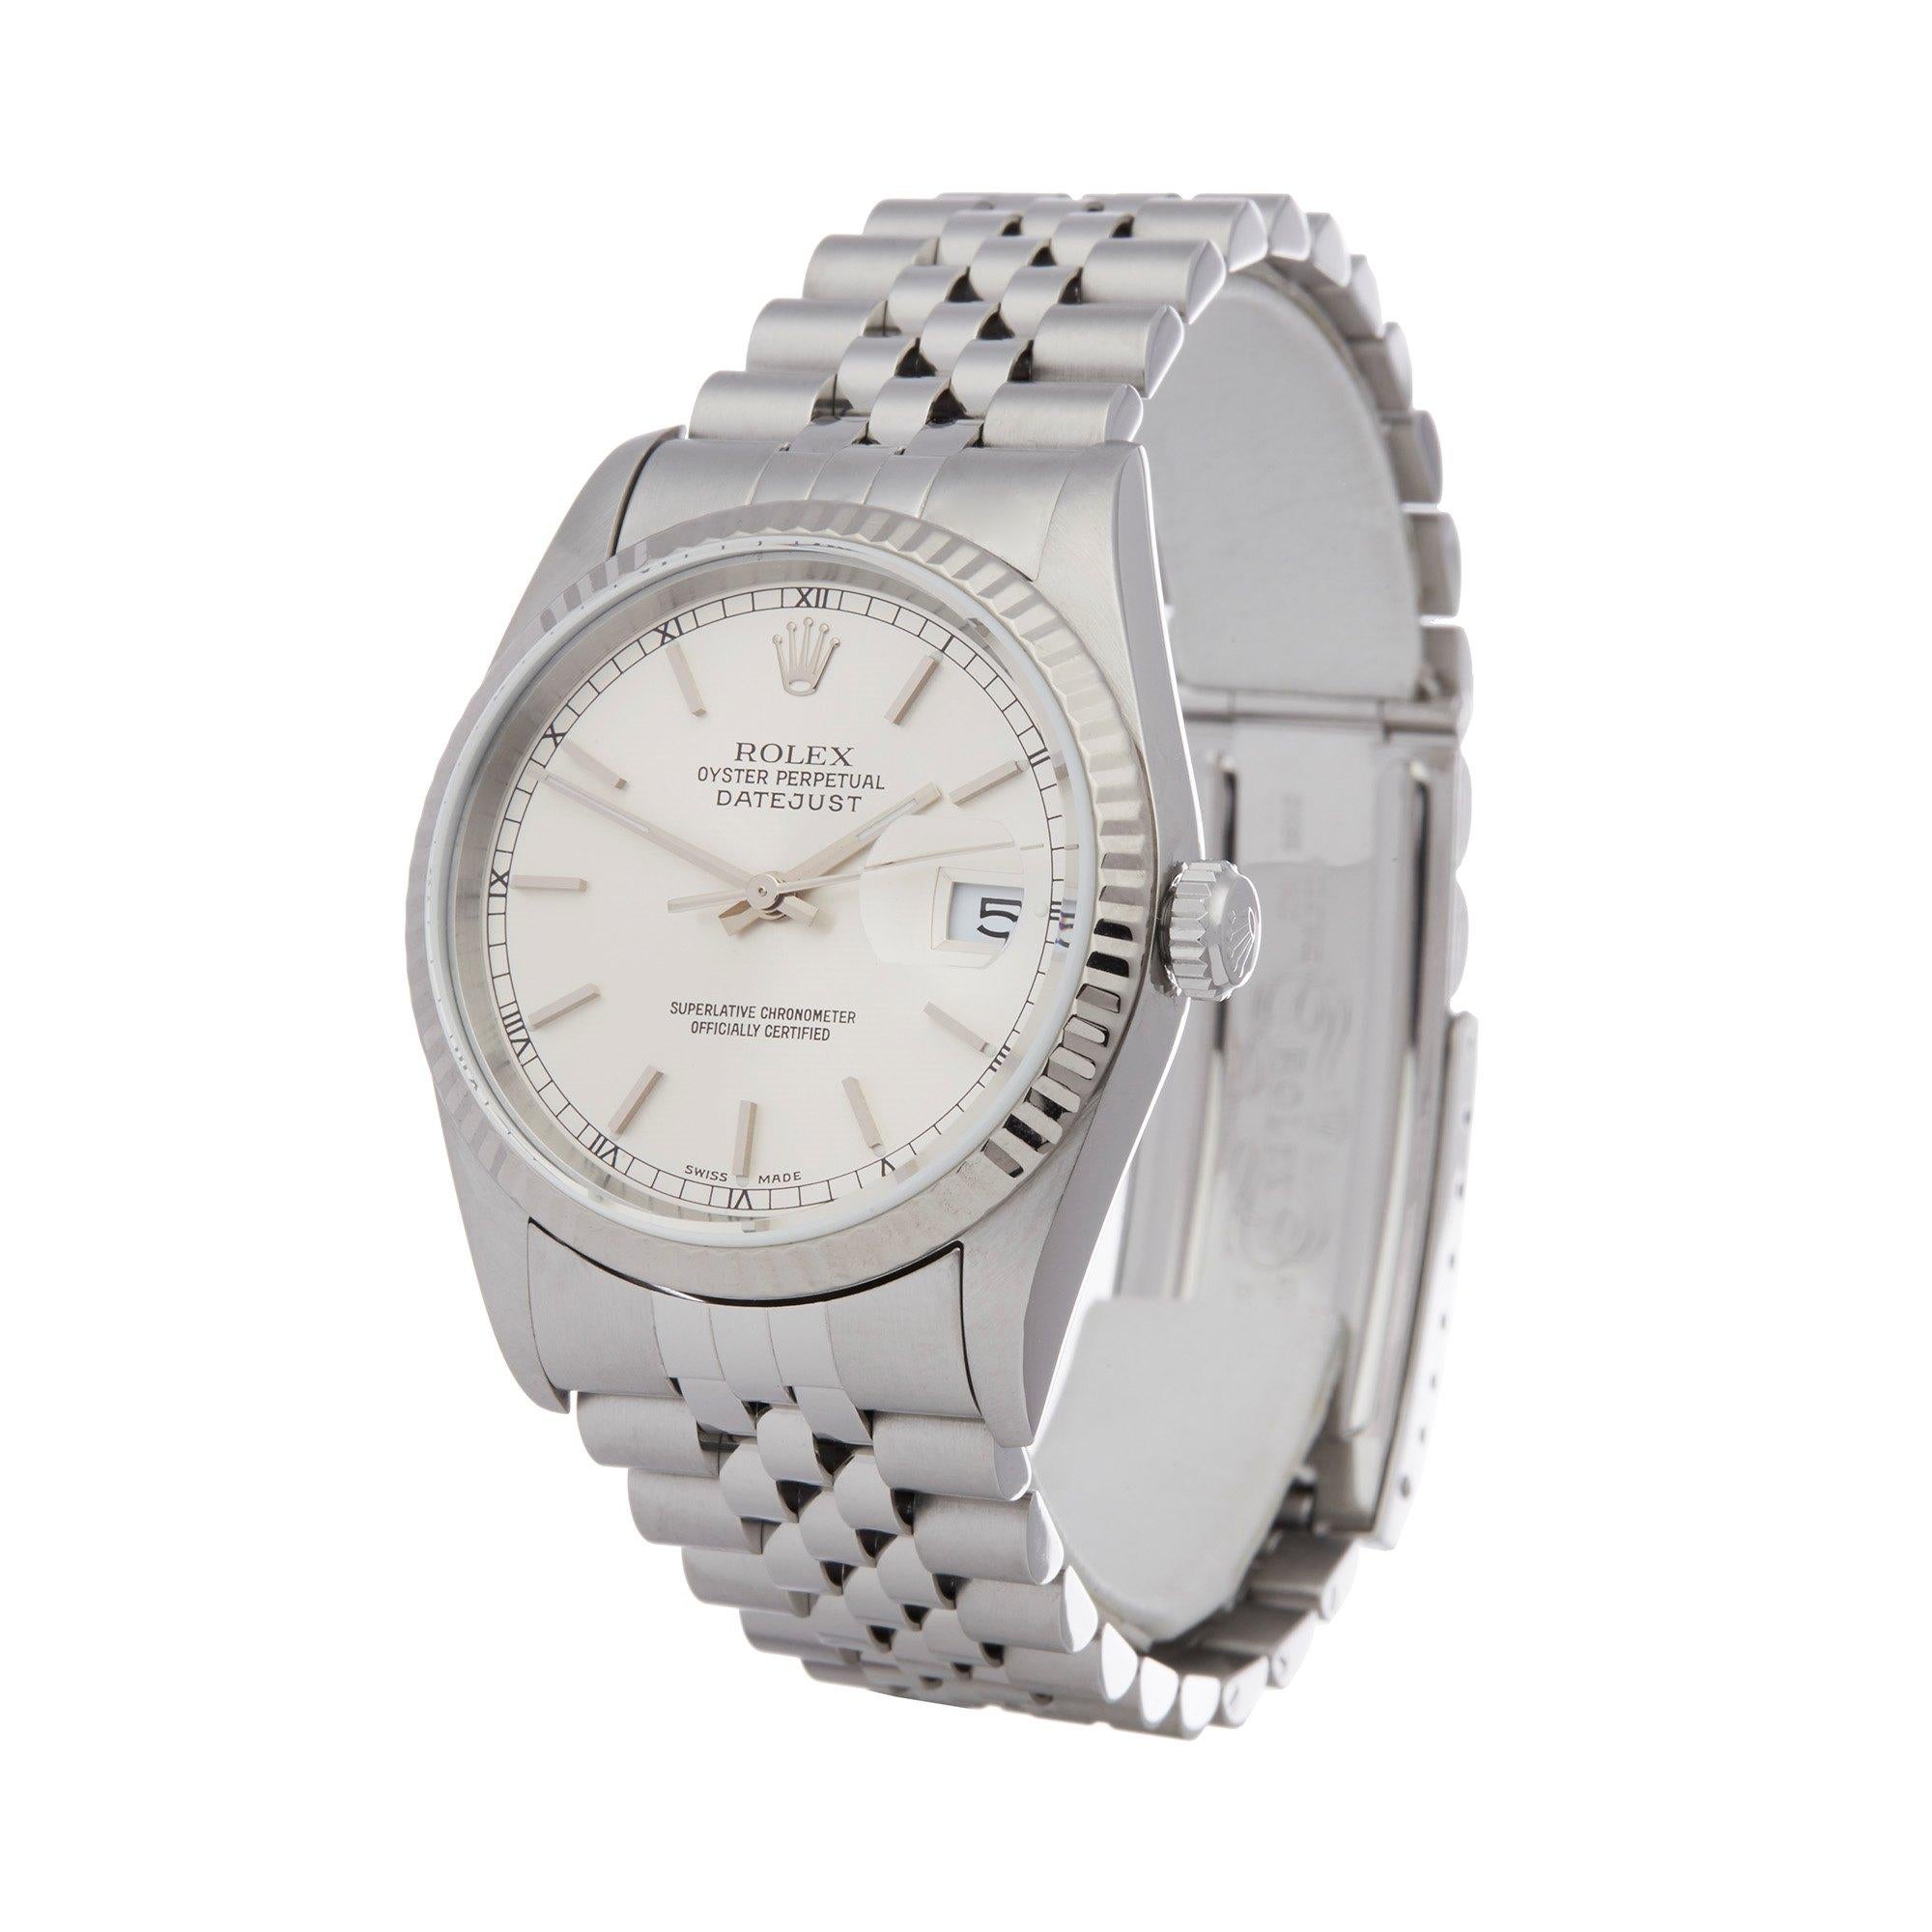 Xupes Reference: W007431
Manufacturer: Rolex
Model: Datejust
Model Variant: 36
Model Number: 16234
Age: 1997
Gender: Unisex
Complete With: Rolex Box
Dial: Silver Baton
Glass: Sapphire Crystal
Case Size: 36mm
Case Material: Stainless Steel
Strap